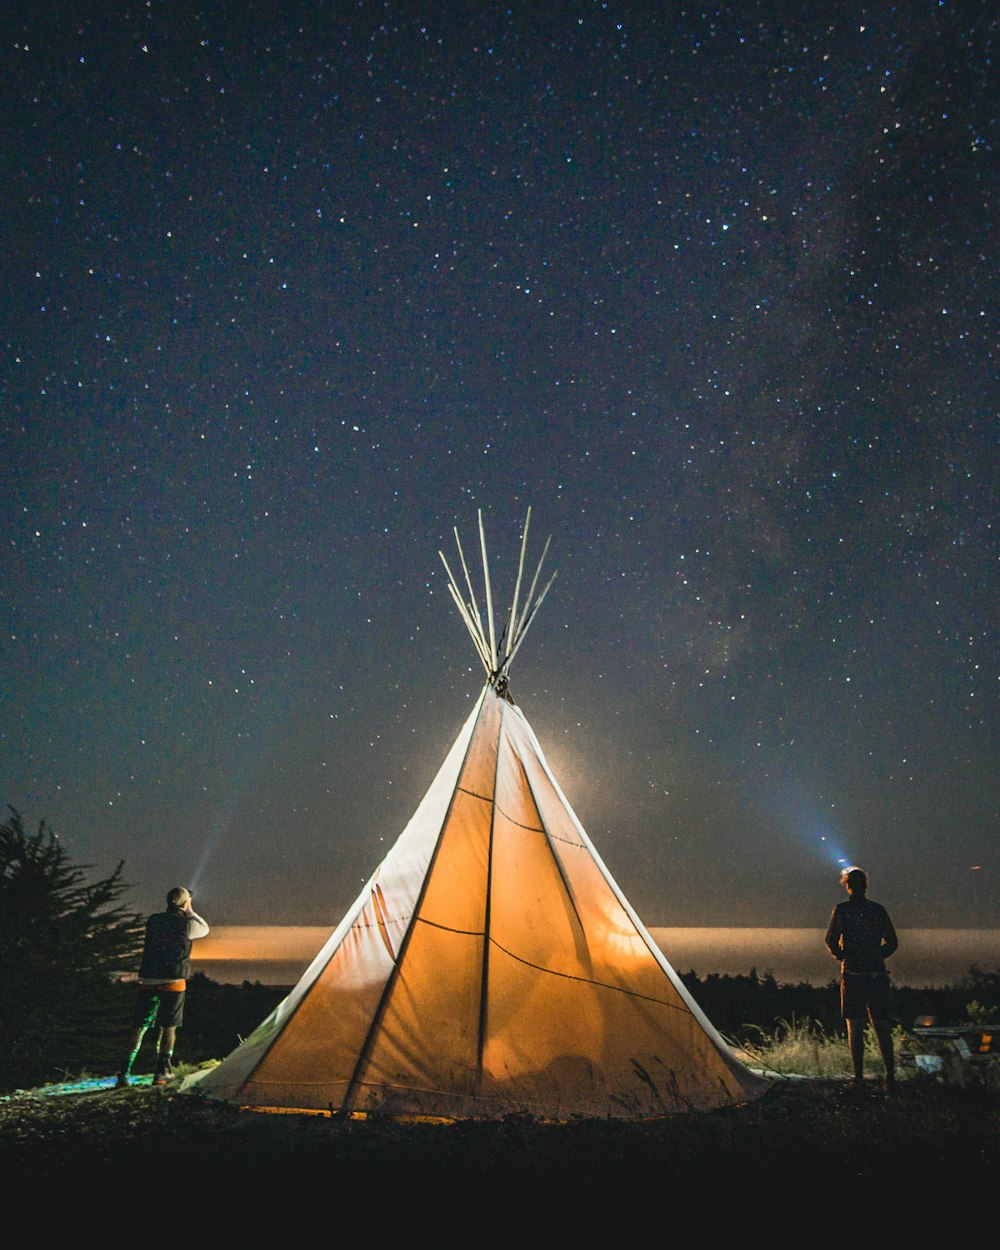 two person standing beside tent during nighttime